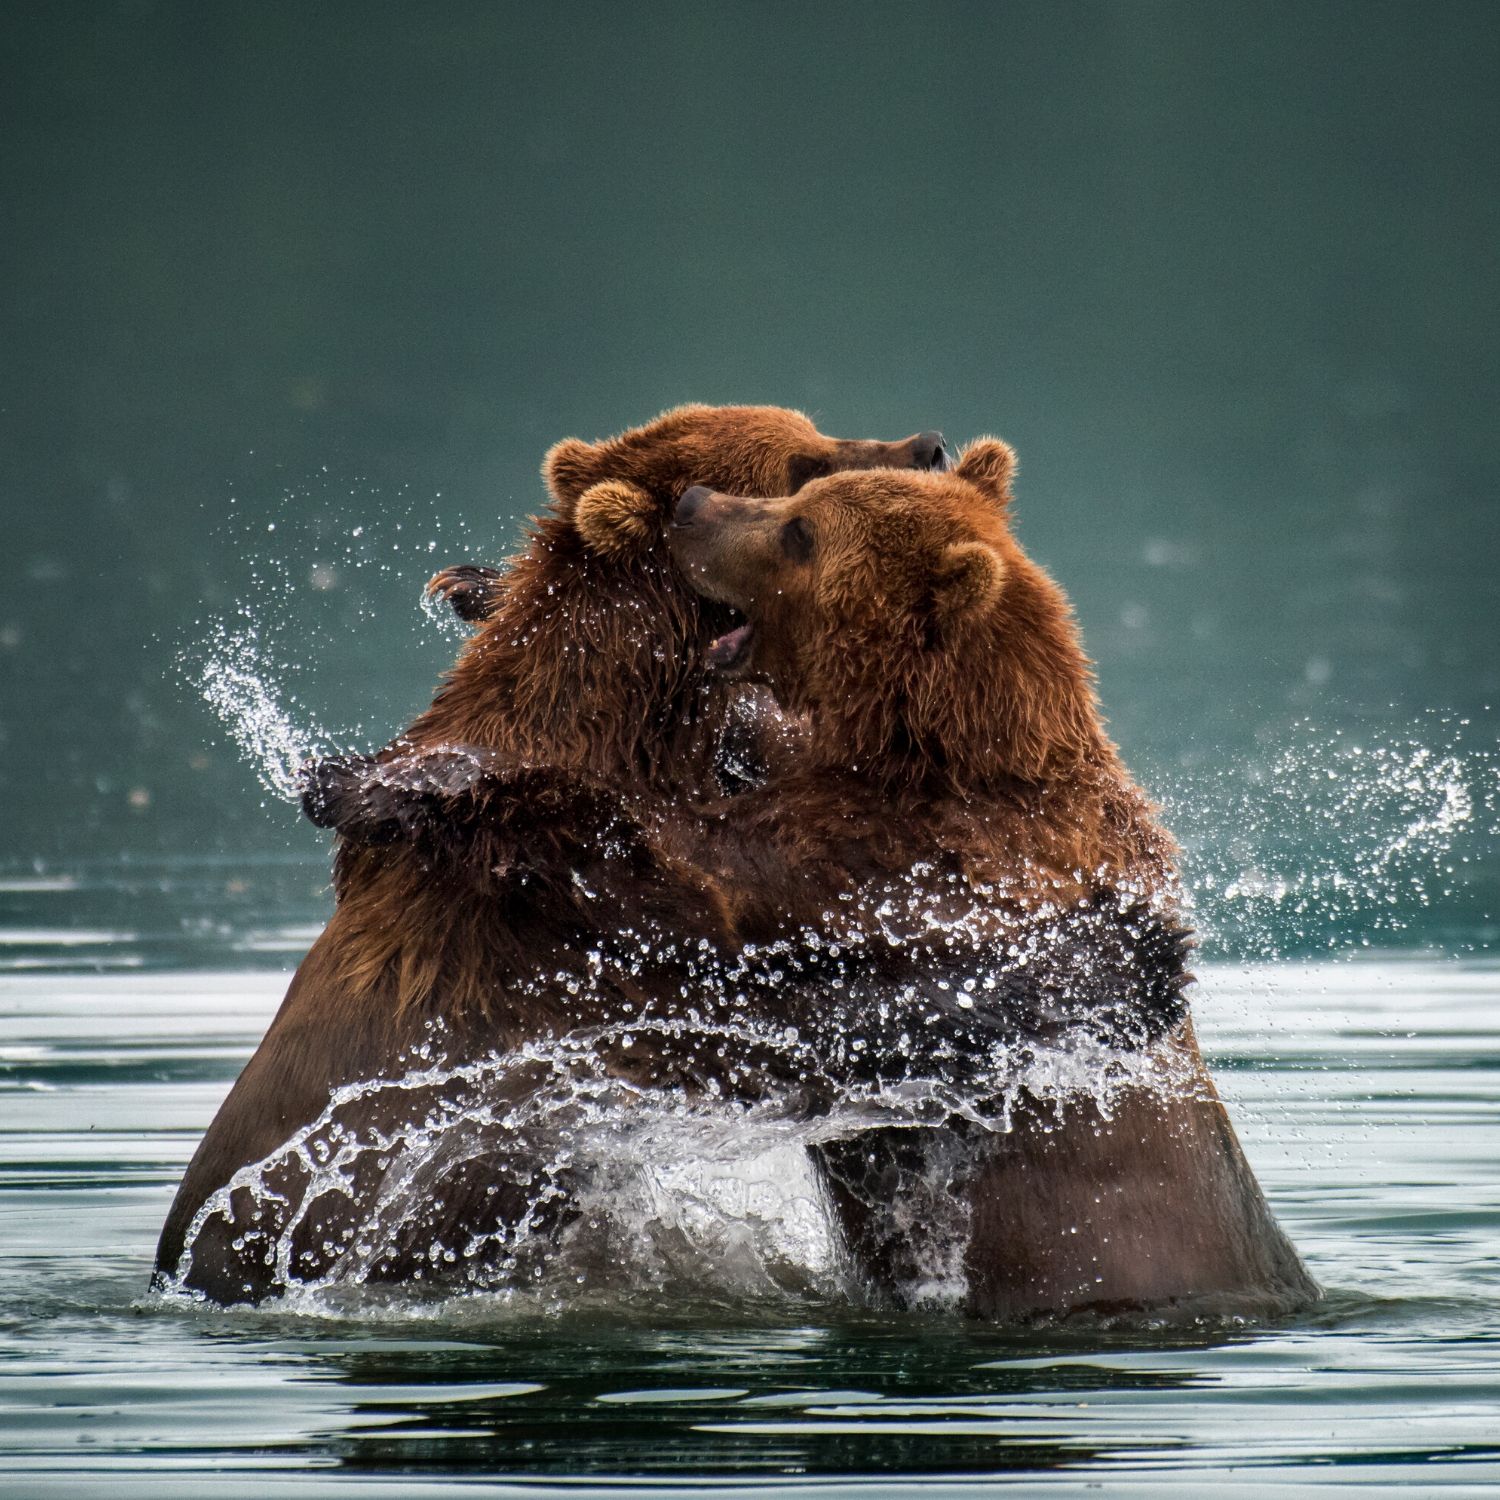 Brown Bears in Battle this wildlife photograph was taken by professional travel photographer Ignacio Palacios